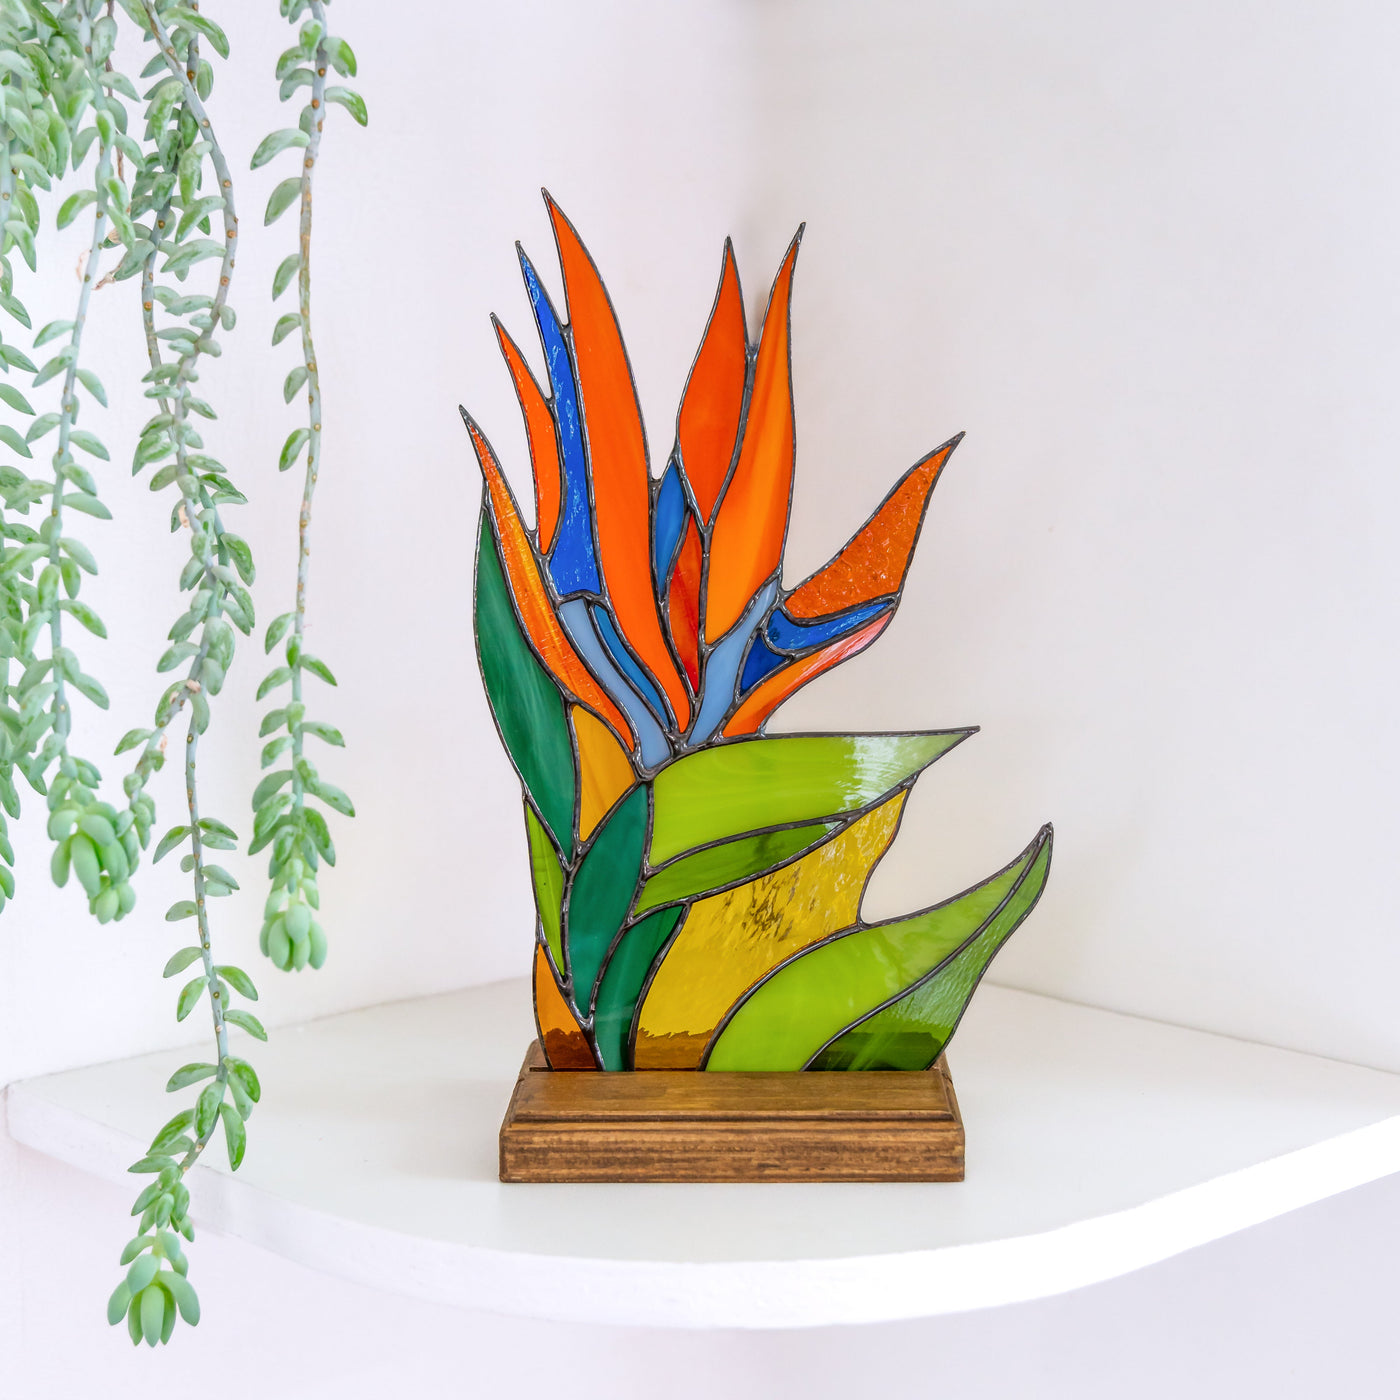 Stained glass strelitzia flower panel in a wooden base for table decor